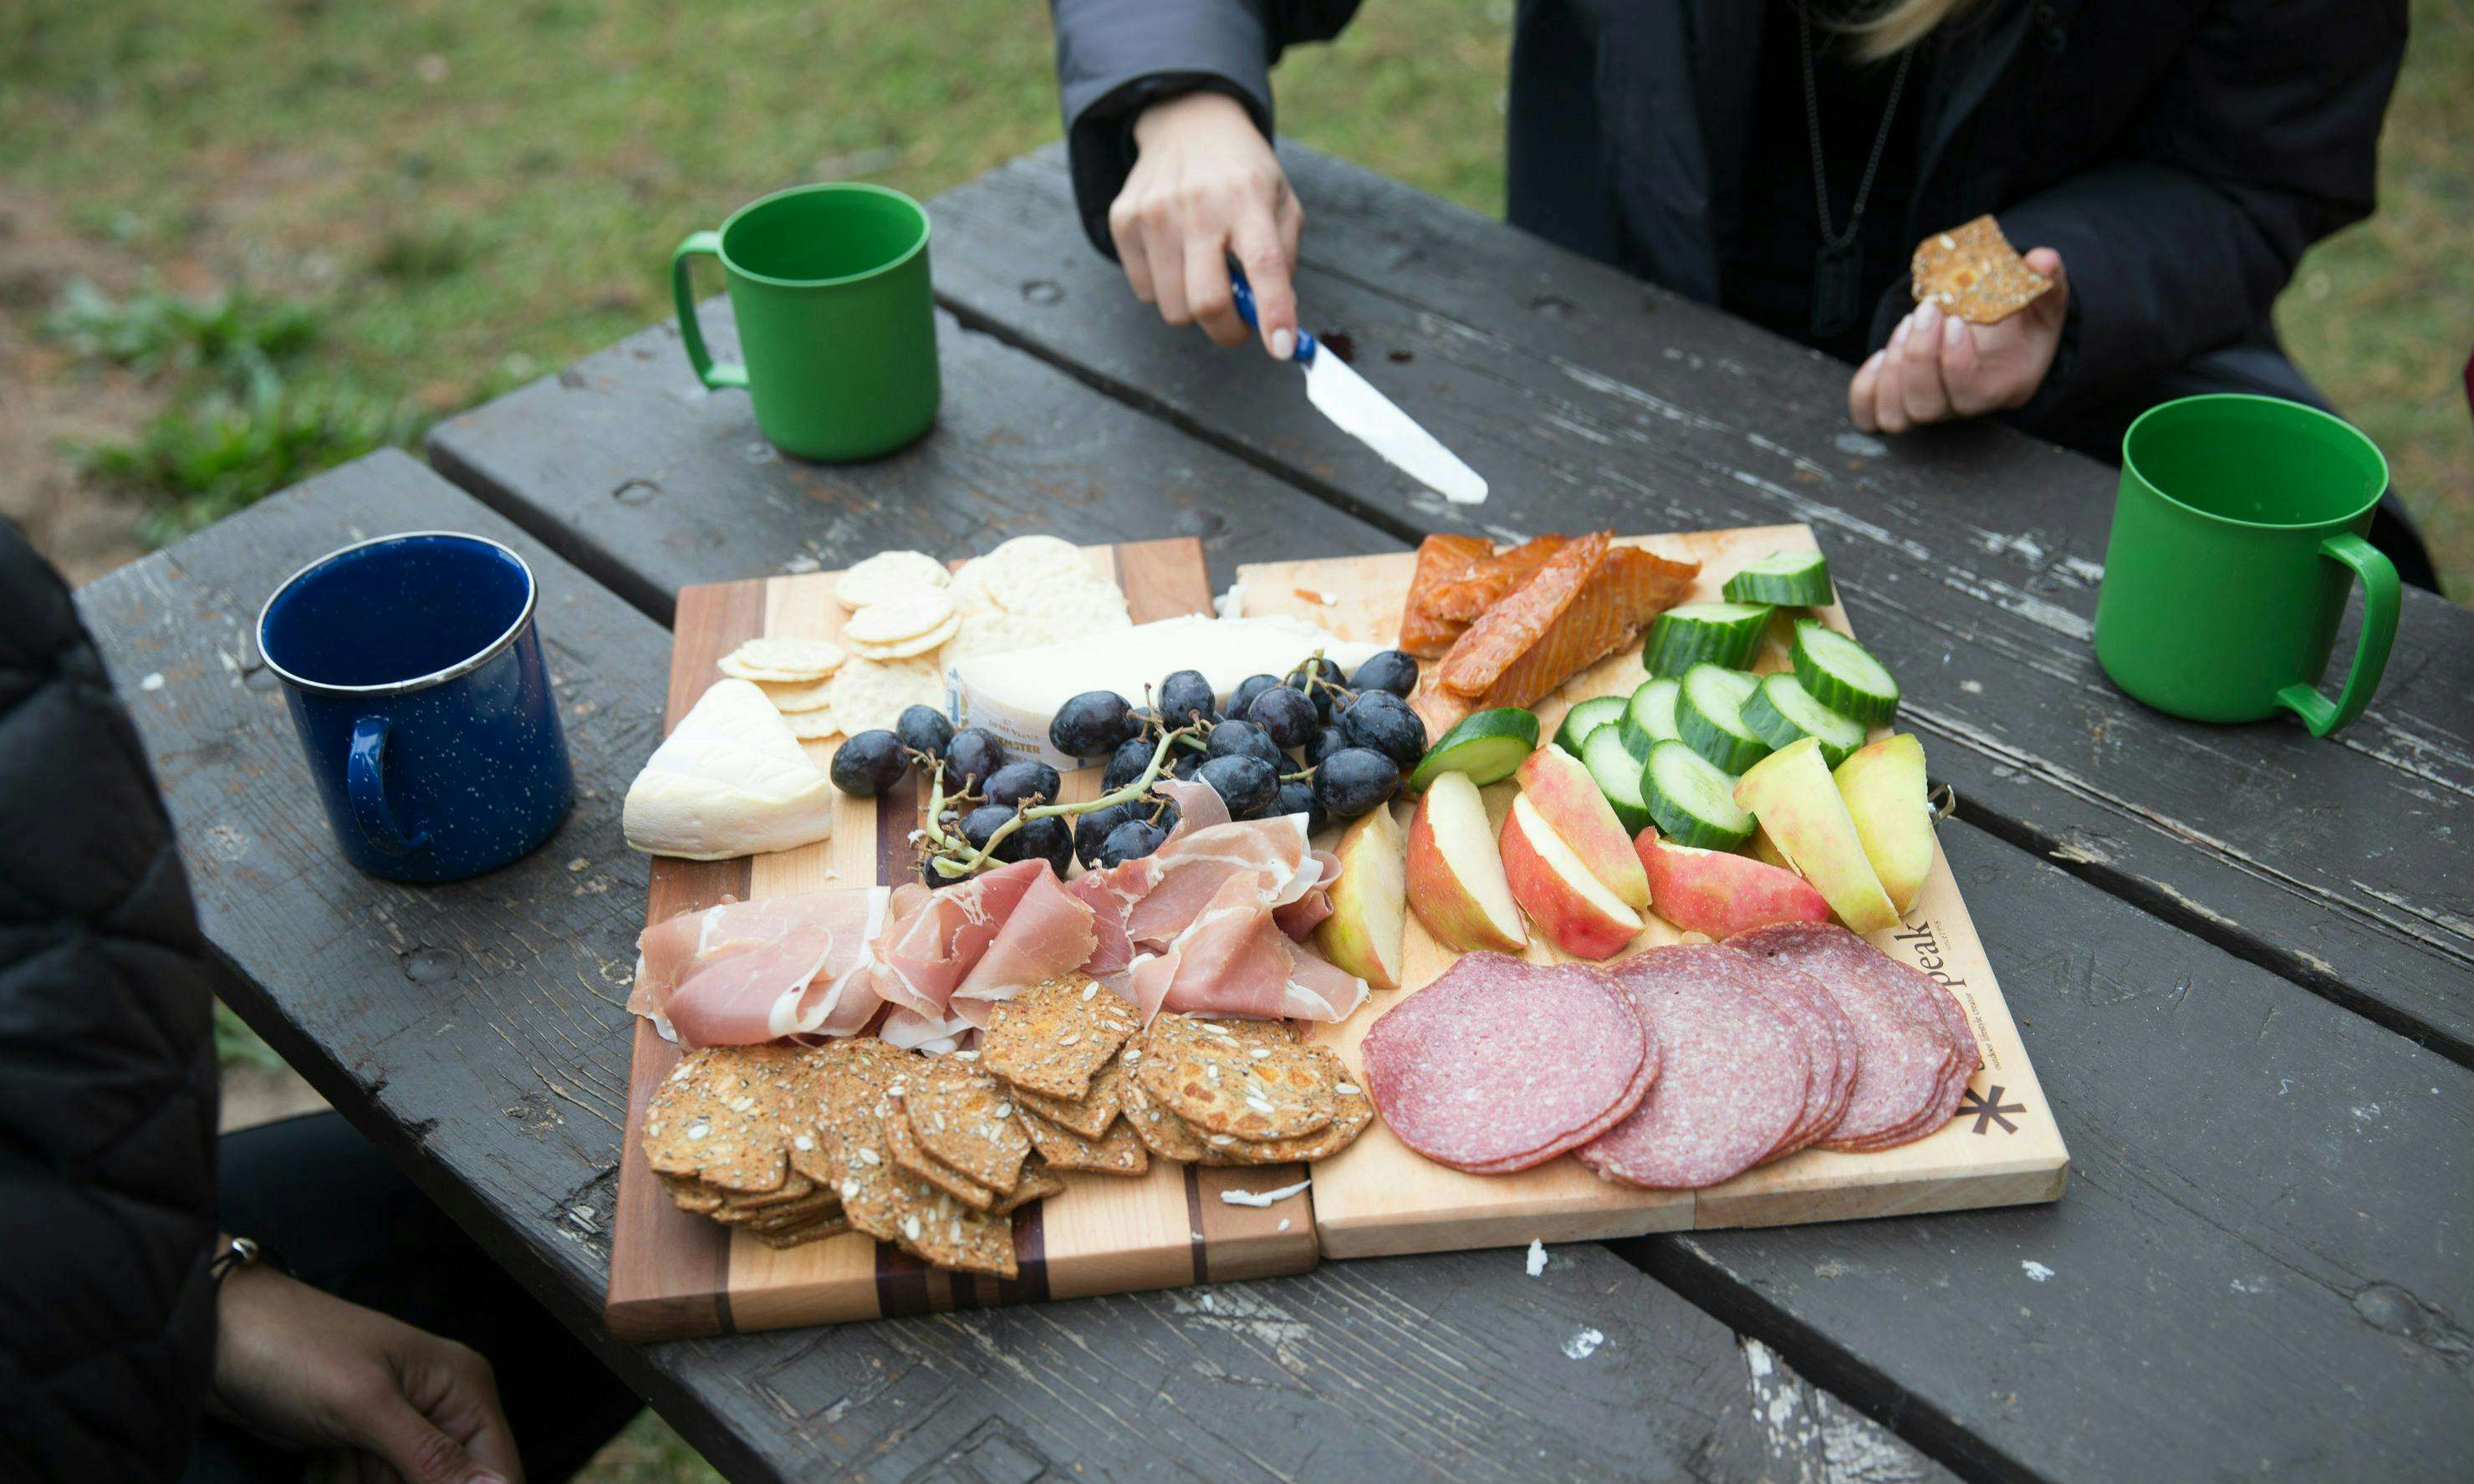 Amazing spread of snacks on a picnic table